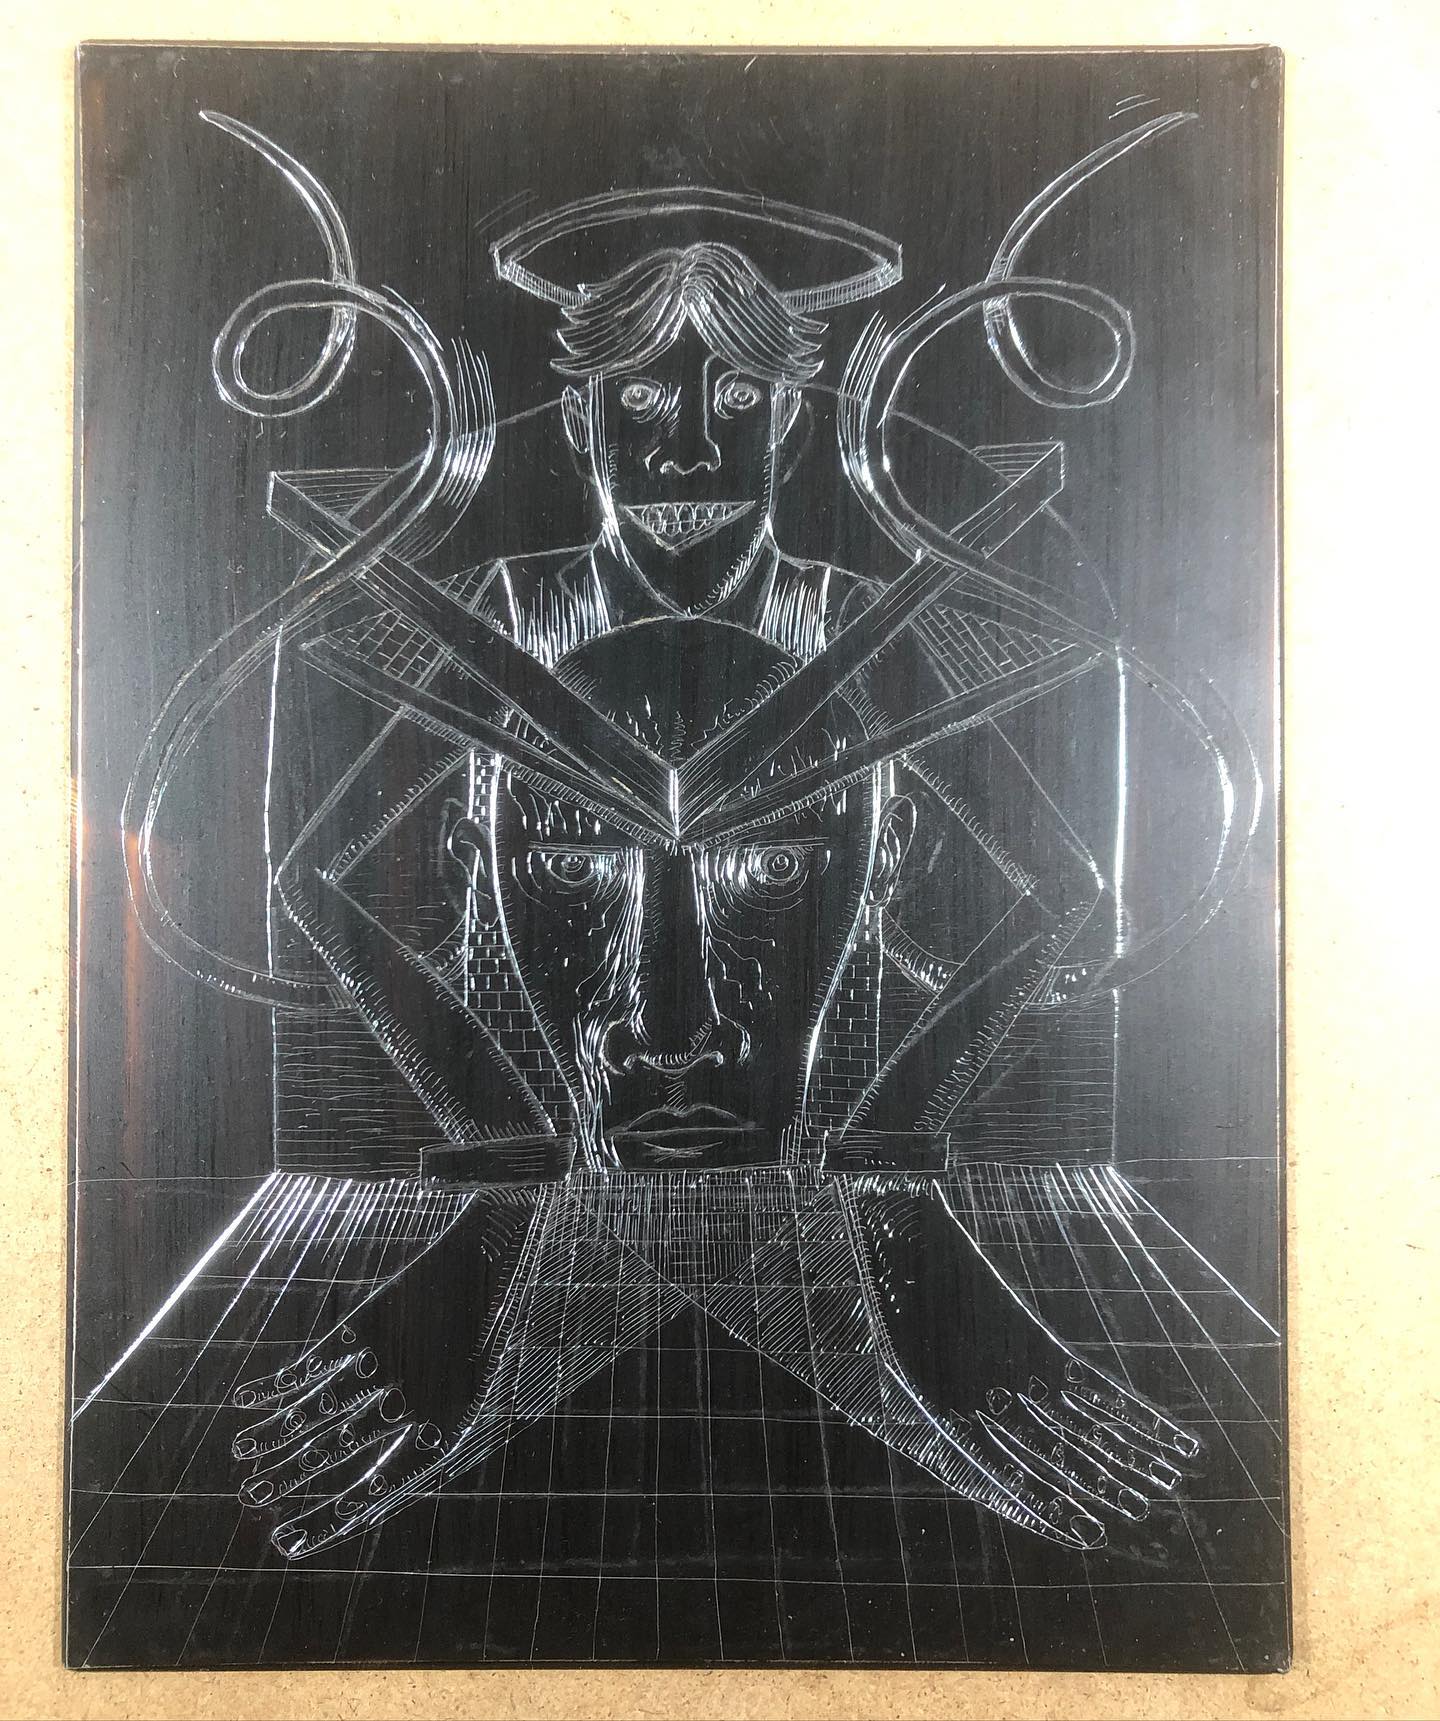 Scratched-off hardground on a zinc plate for etching / Image is a symmetrical composition of two heads and two hands